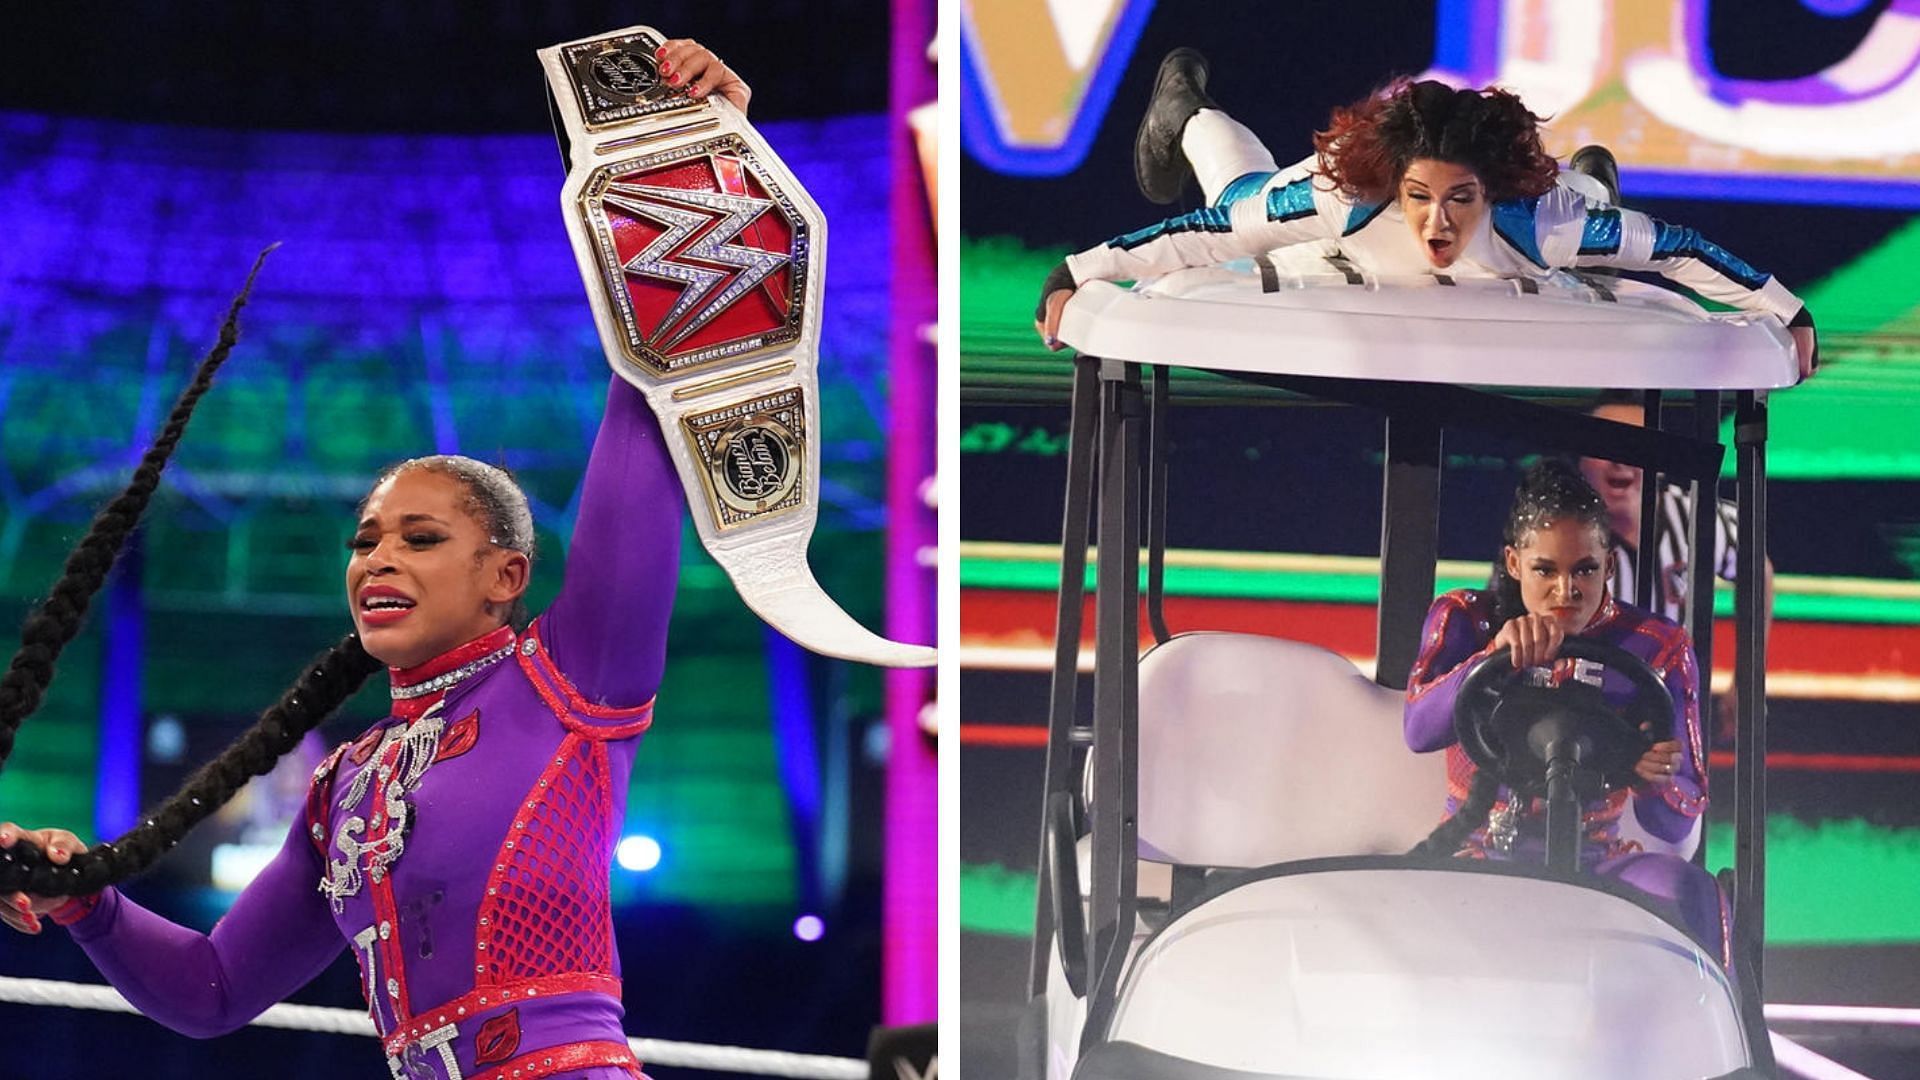 Bianca Belair defended the RAW Women